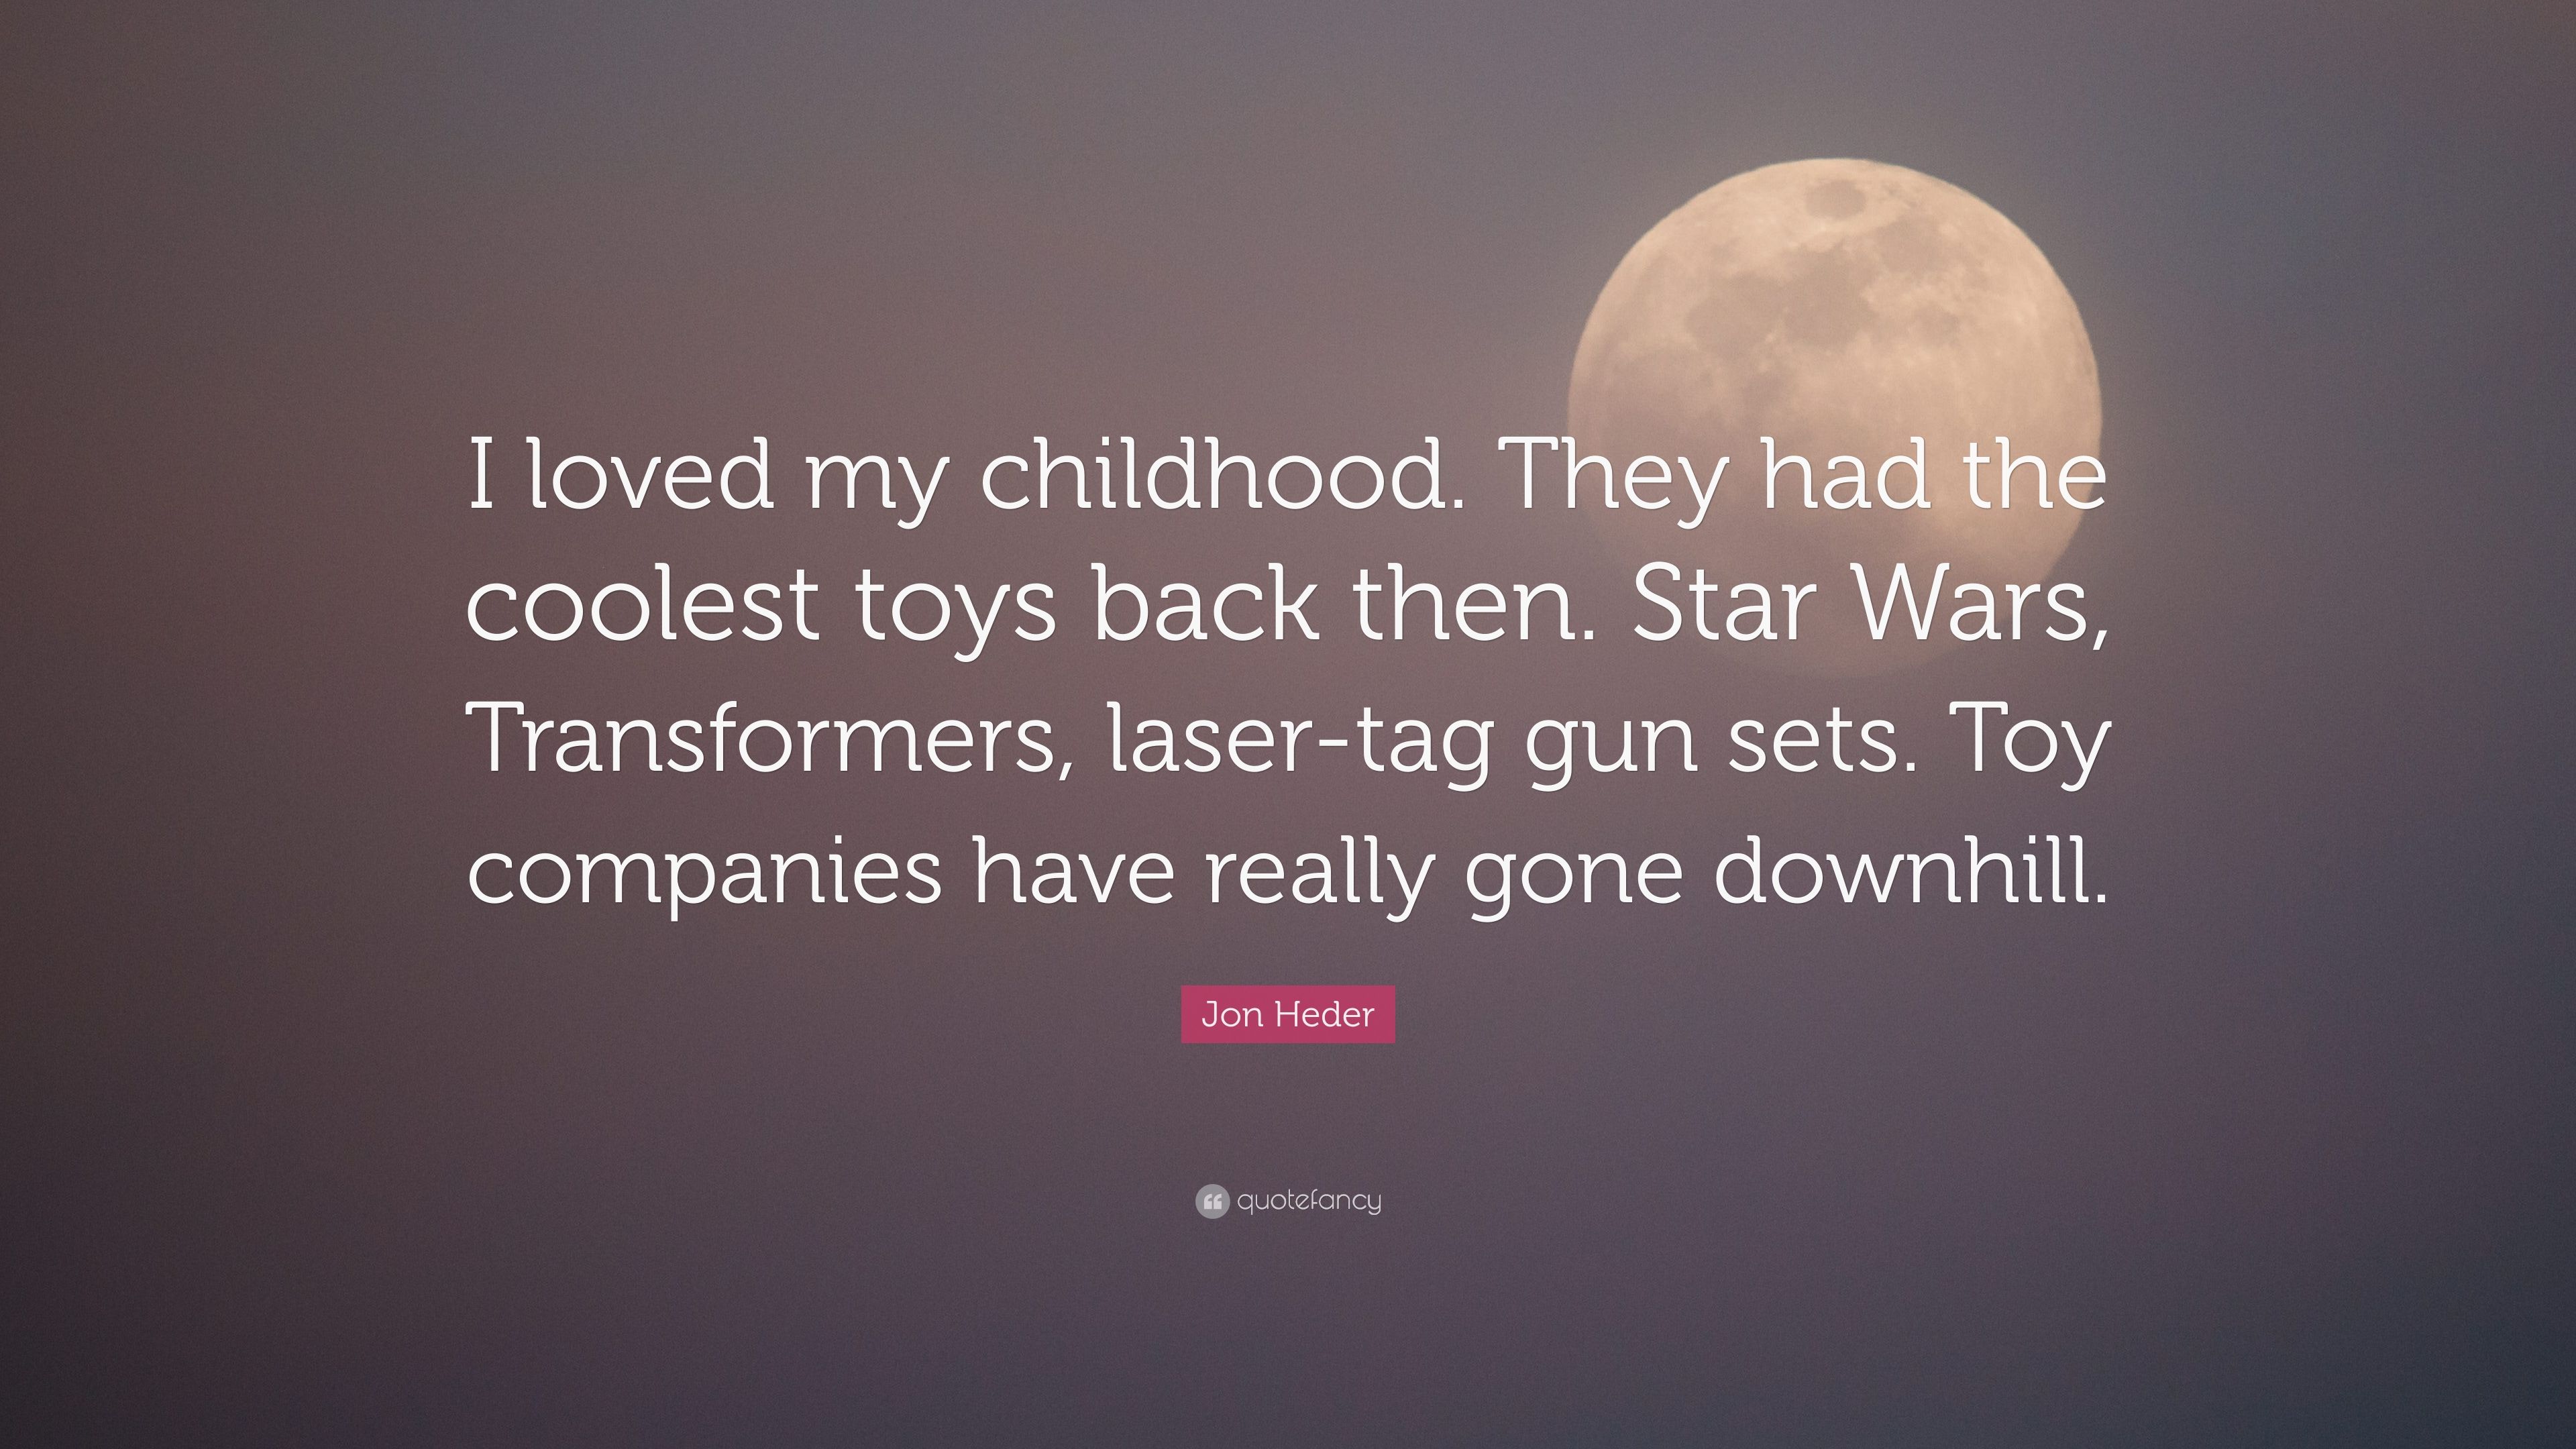 Jon Heder Quote: “I Loved My Childhood. They Had The Coolest Toys Back Then. Star Wars, Transformers, Laser Tag Gun Sets. Toy Companies Ha.” (7 Wallpaper)